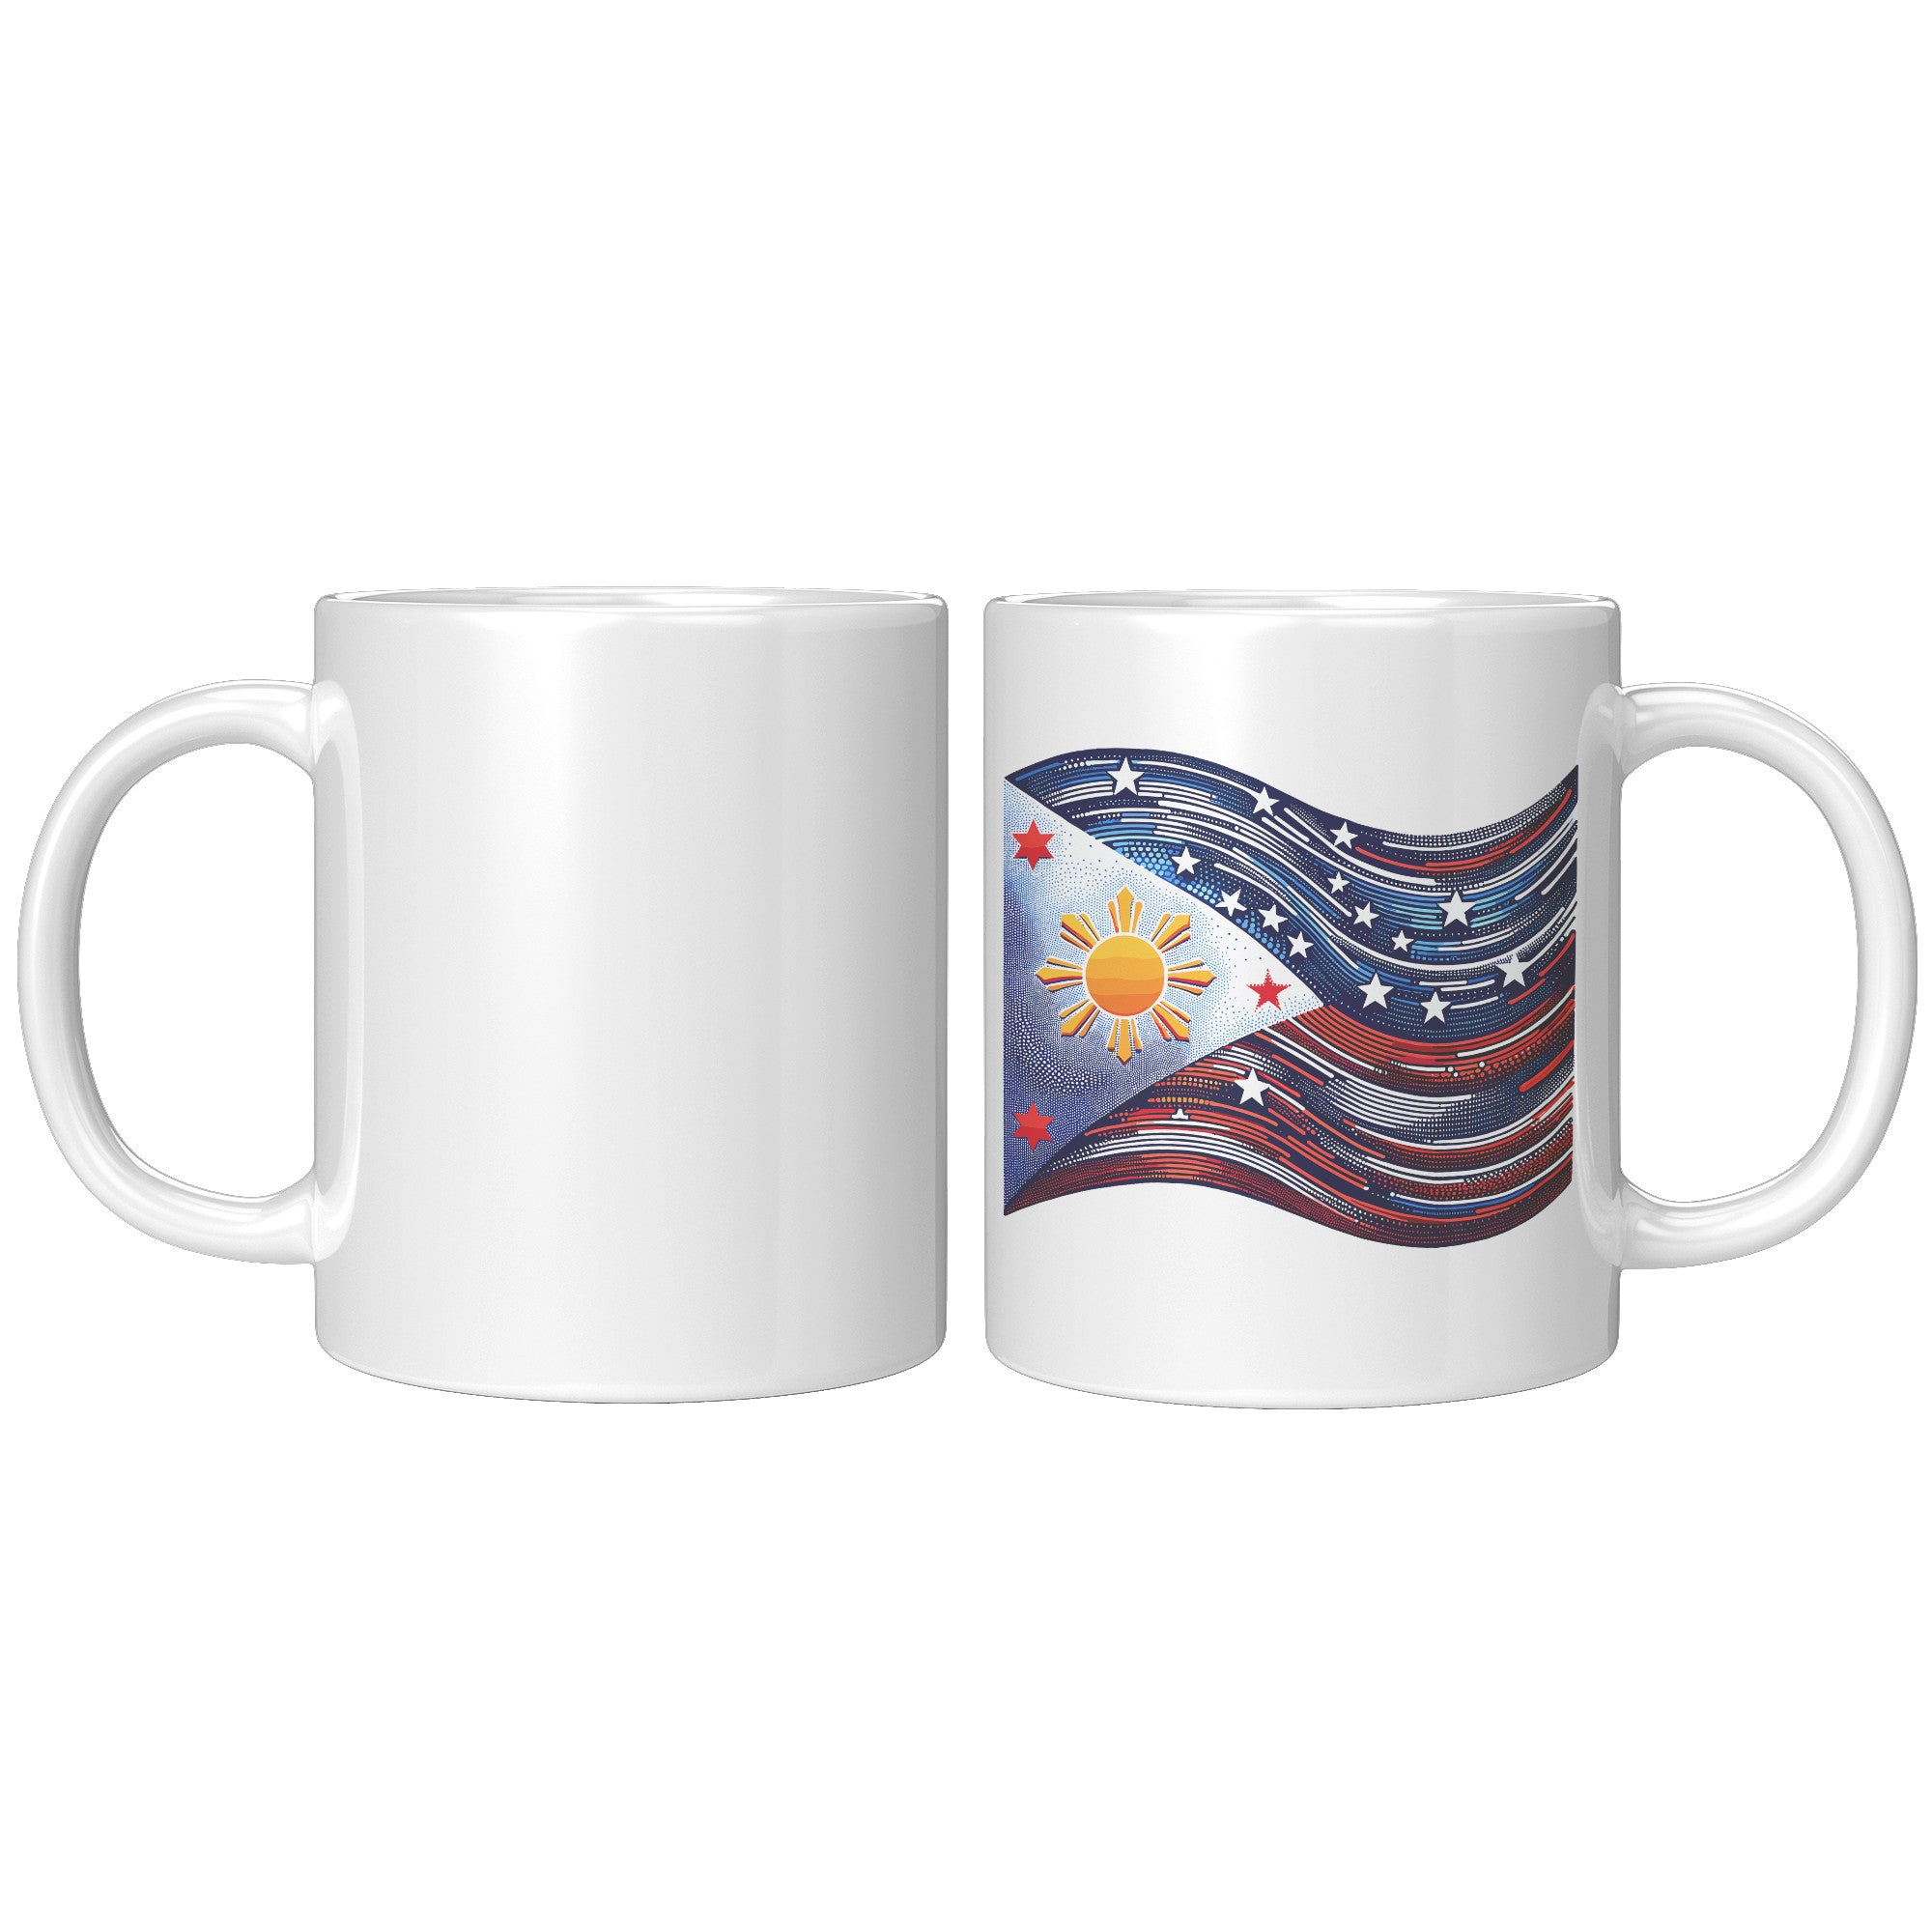 Proudly Pinoy Coffee Mug - Vibrant Filipino Flag Design - Patriotic Gift for Filipinos - Celebrate Heritage with Every Sip!" - O